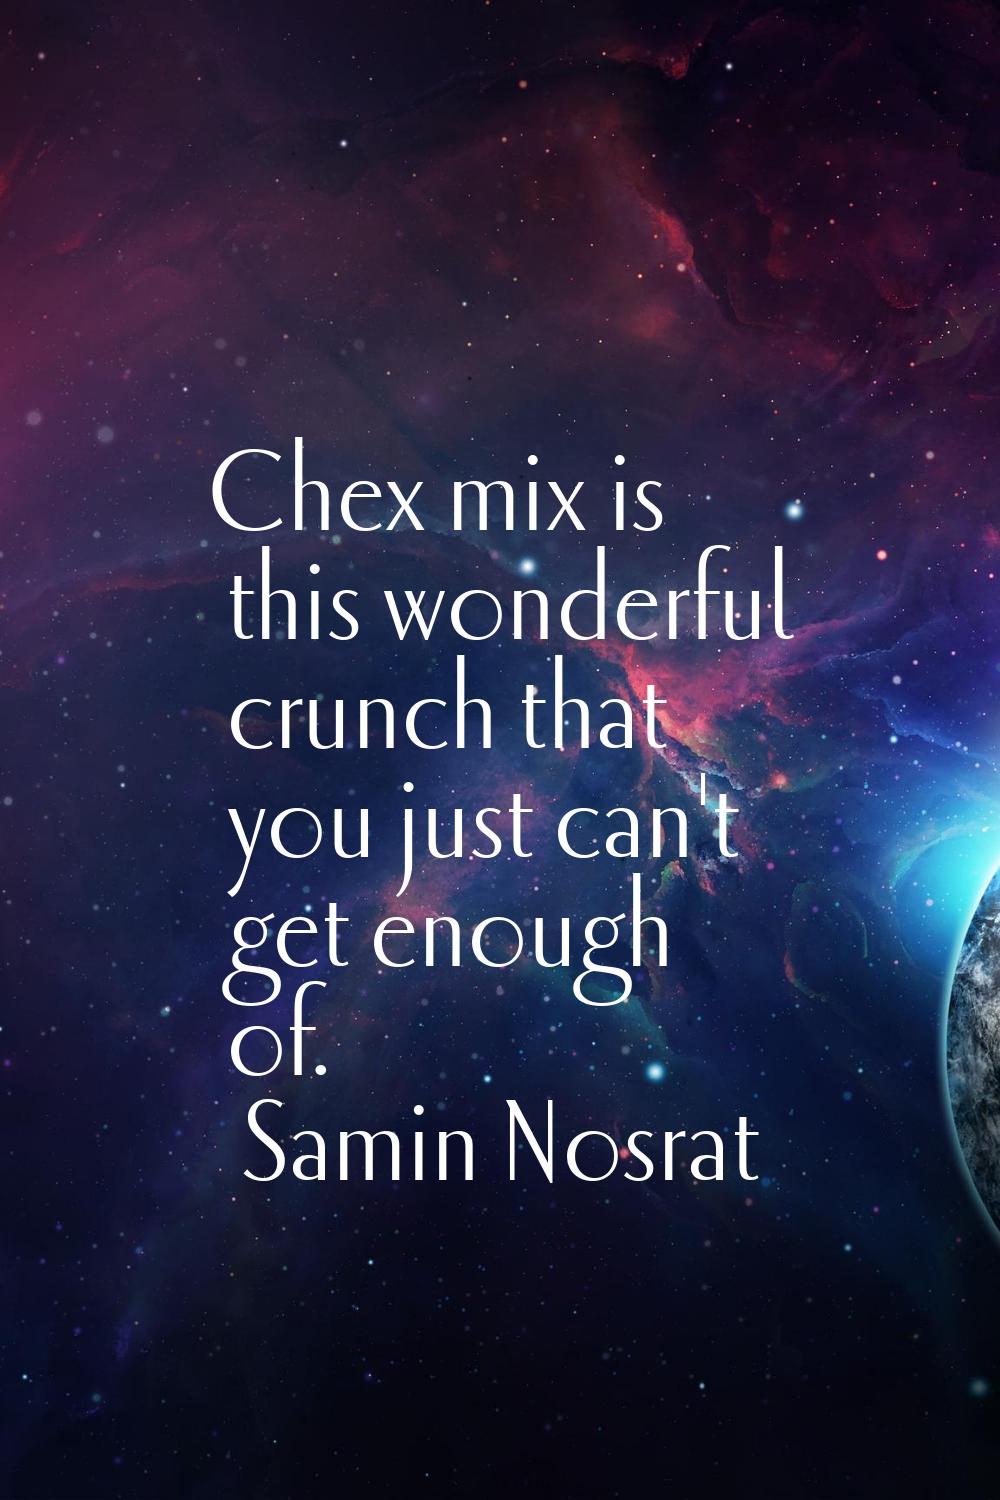 Chex mix is this wonderful crunch that you just can't get enough of.